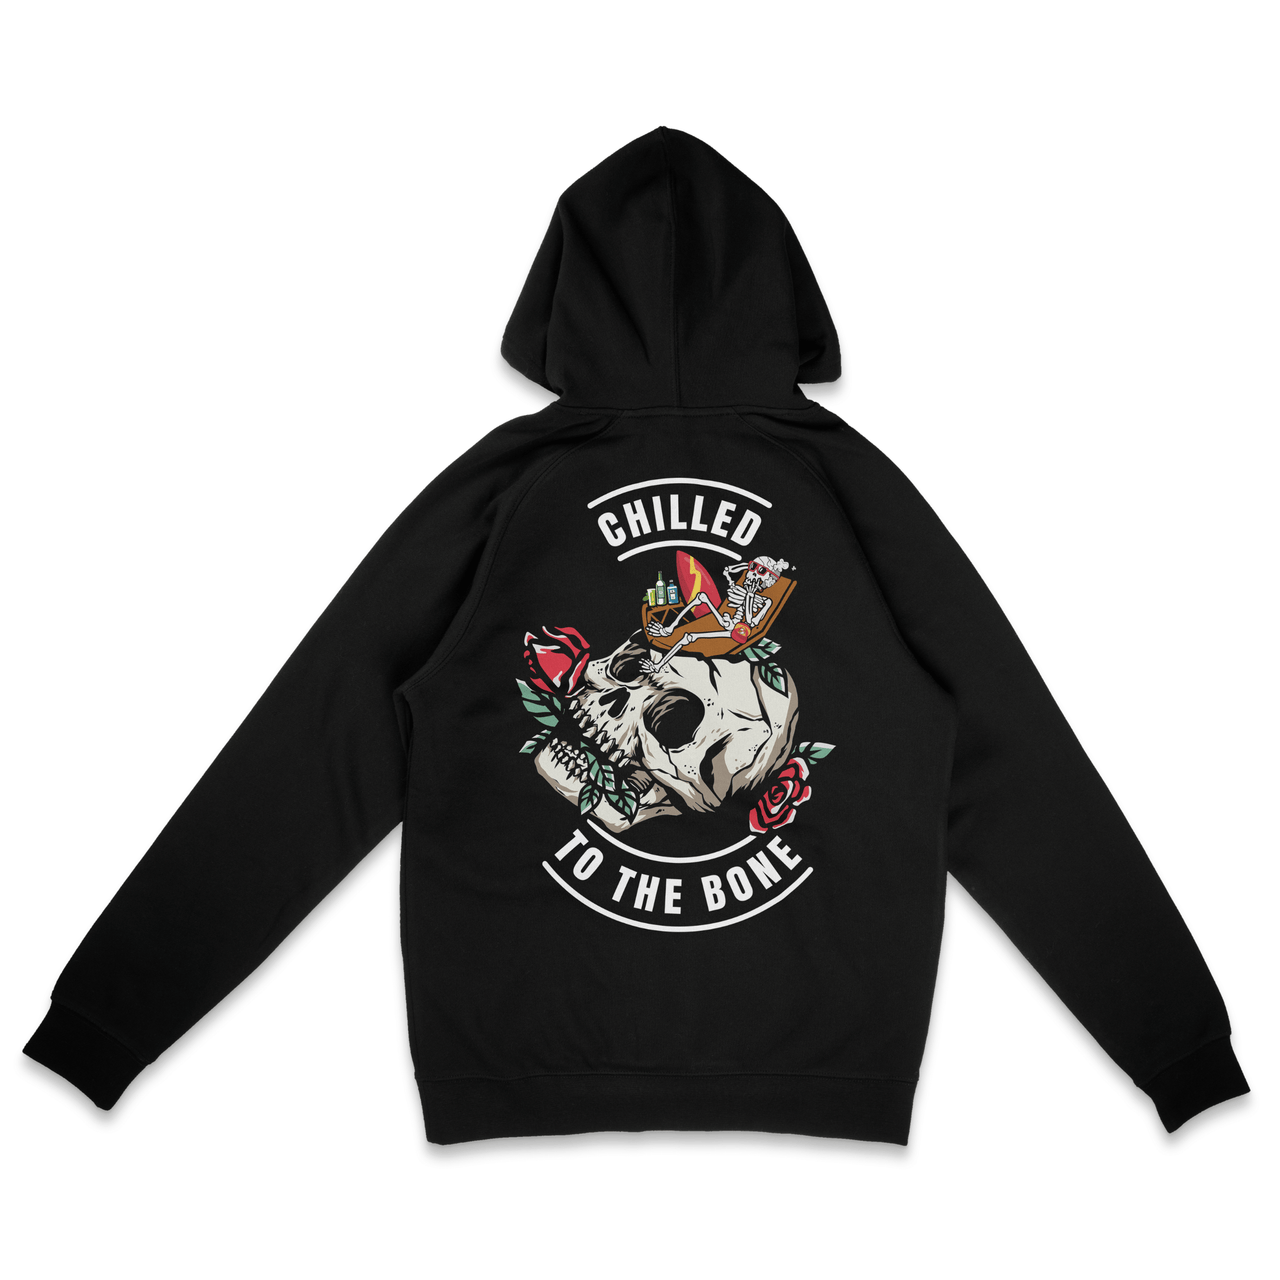 Chilled To The Bone Hoodie